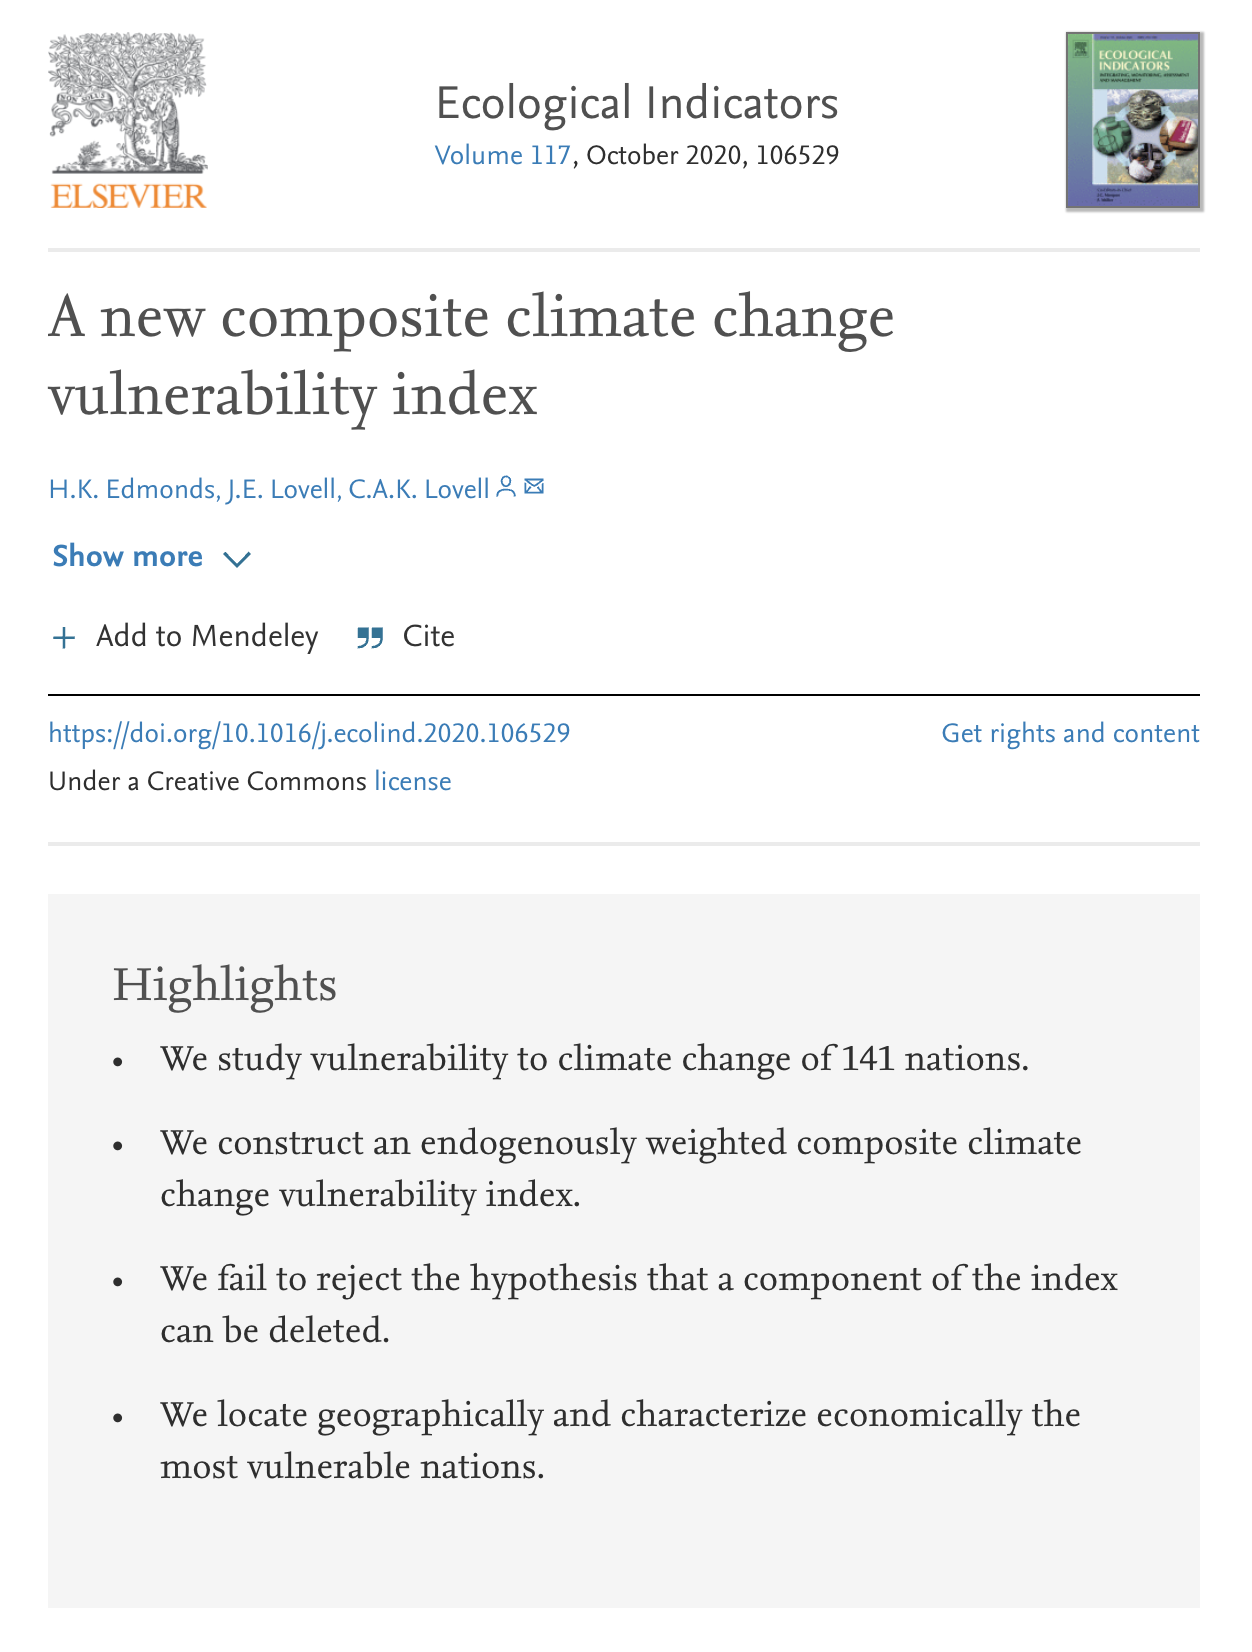 A new composite climate change vulnerability index